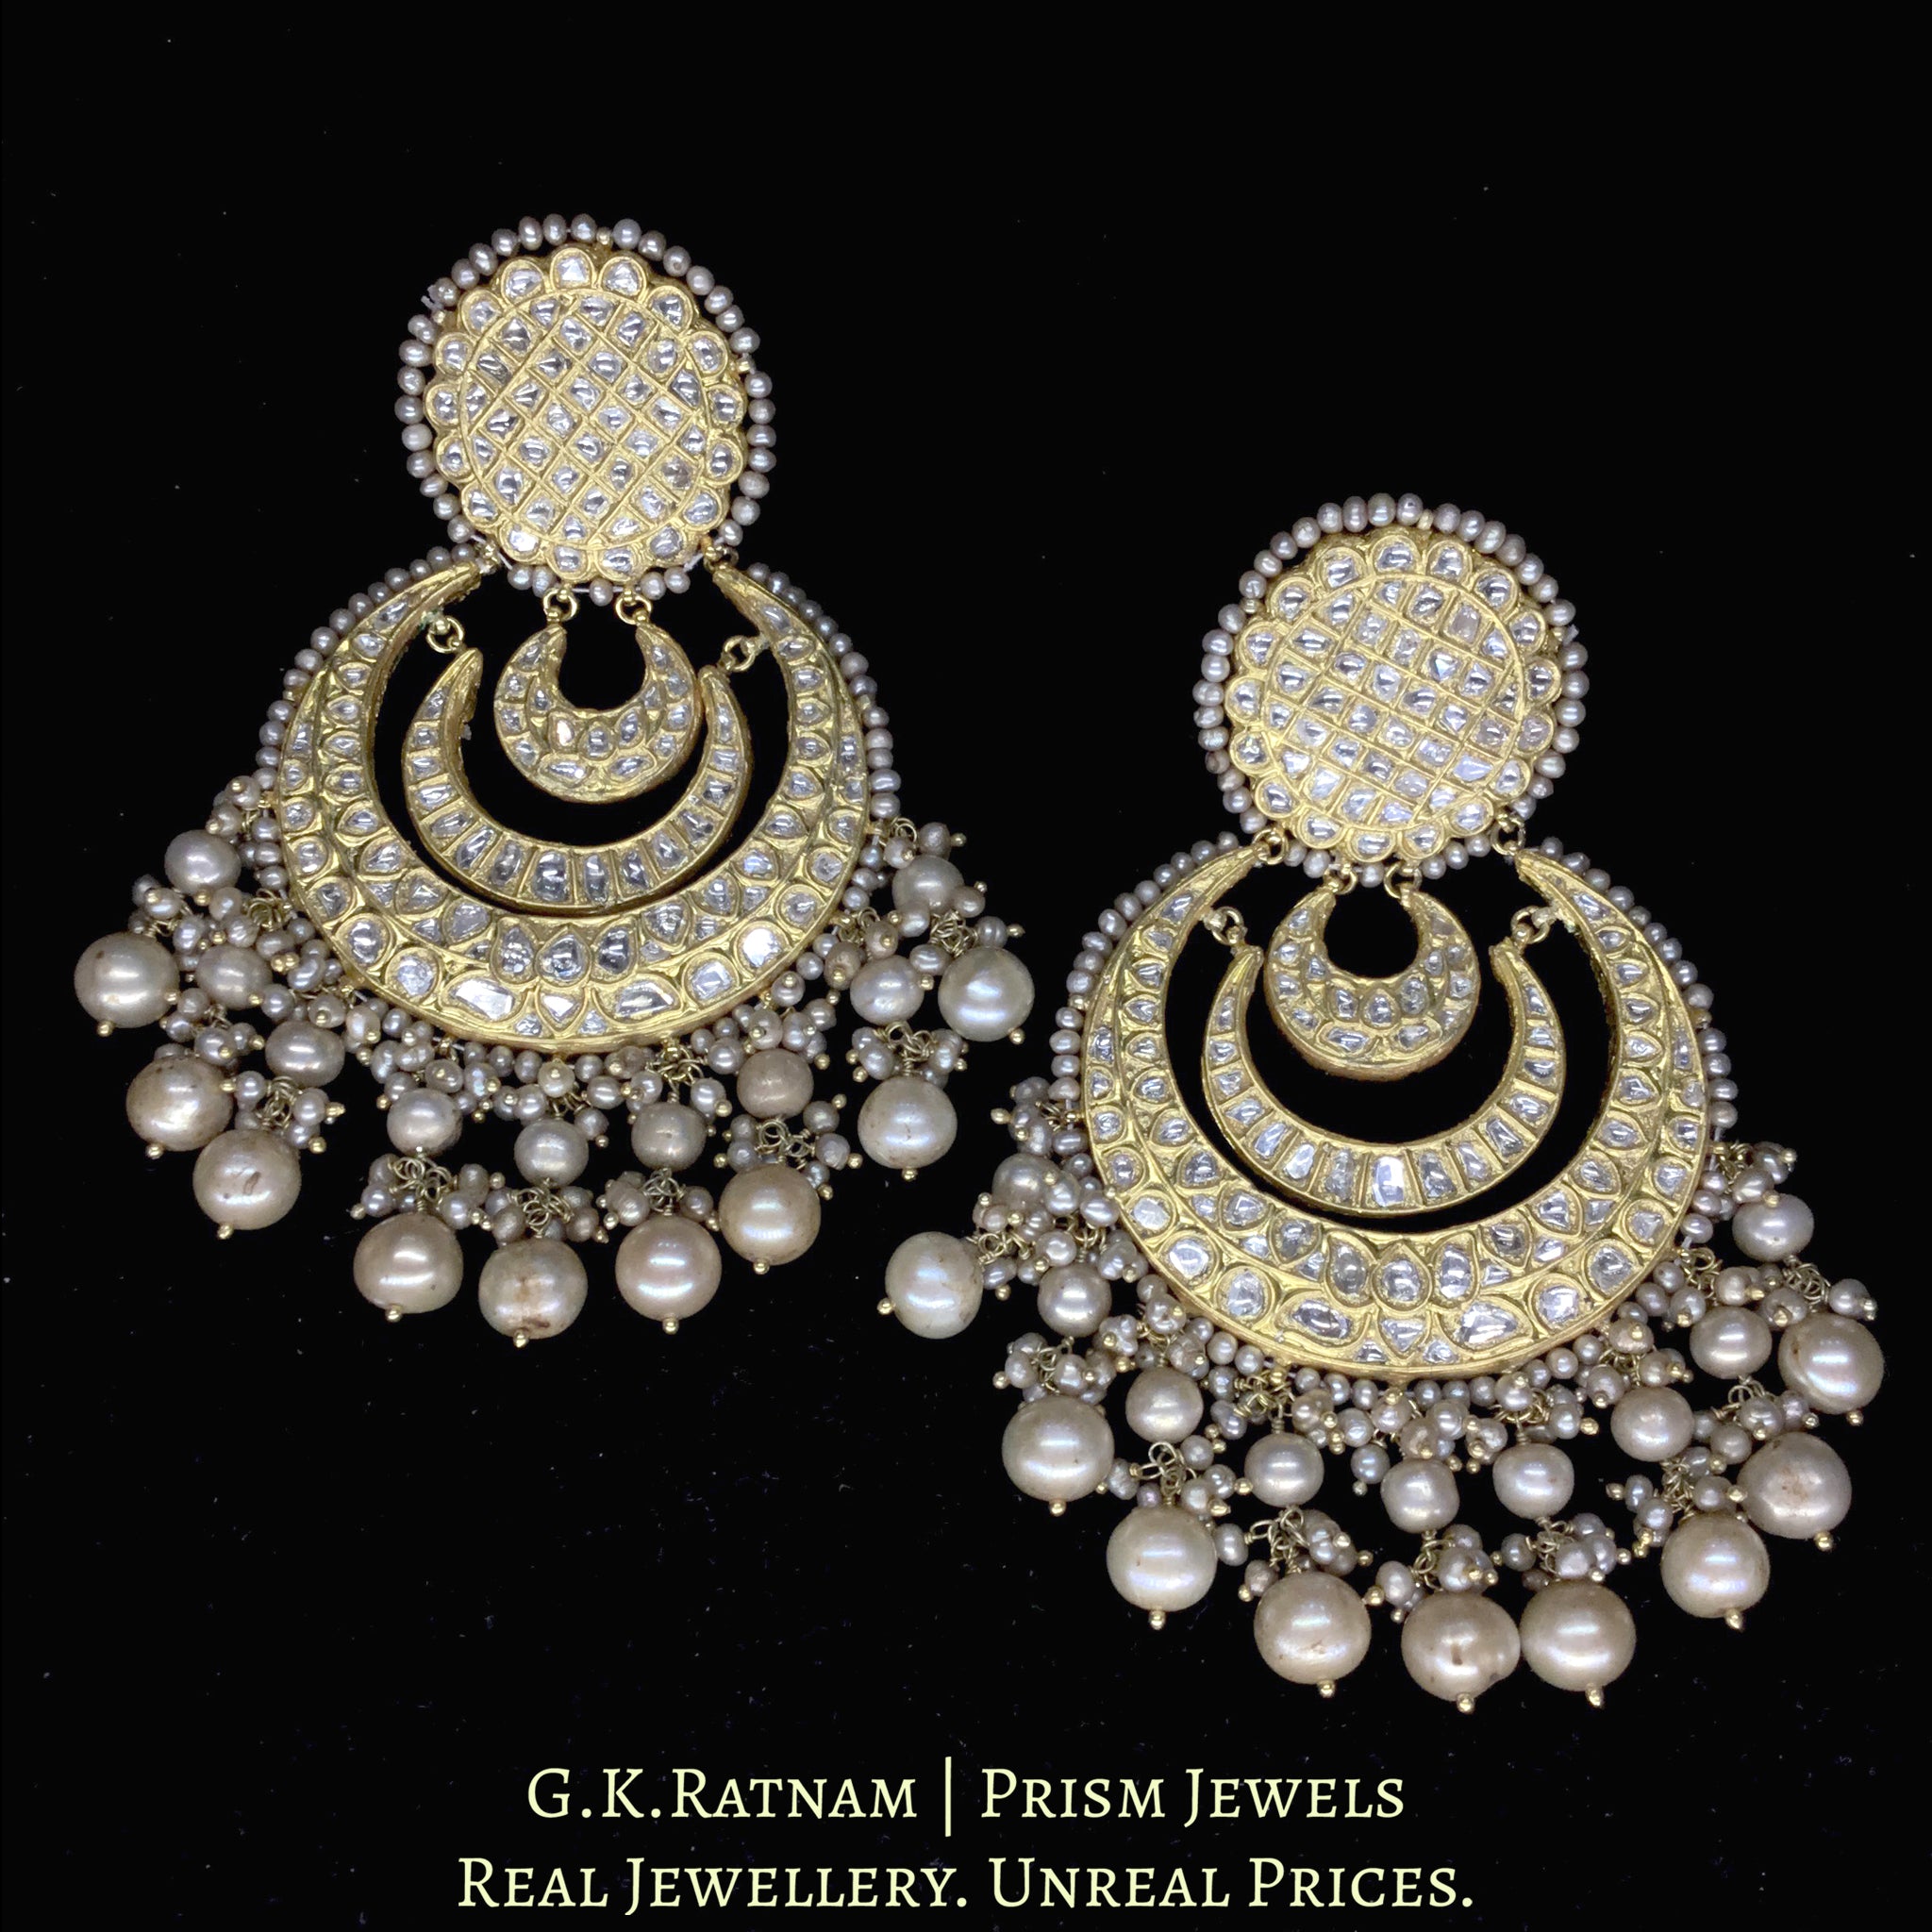 23k Gold and Diamond Polki multi-tier Chand Bali Earring Pair with Antiqued Hyderabadi Pearls